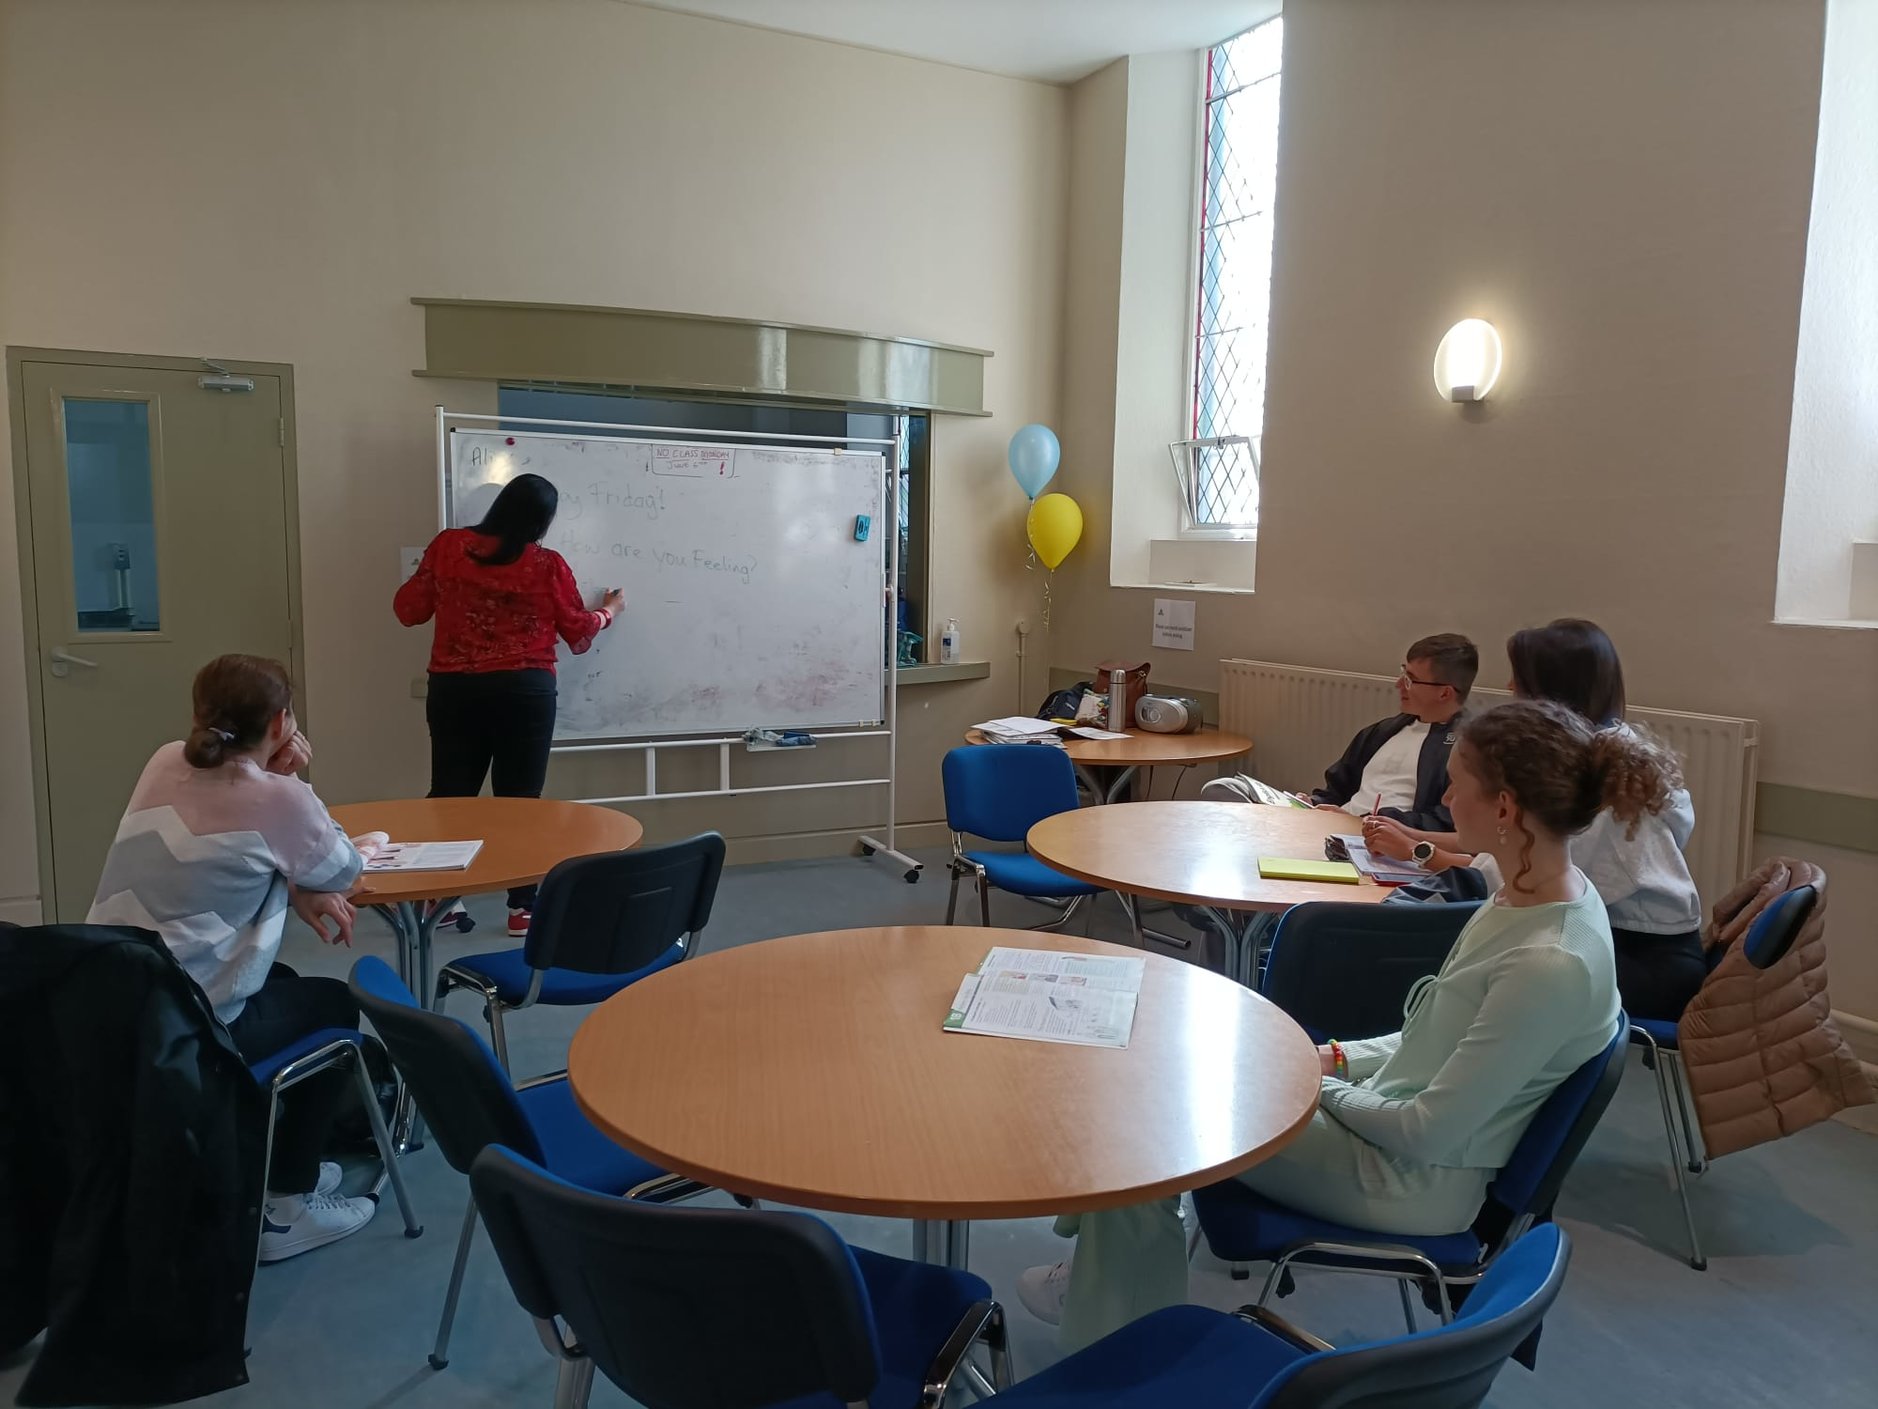 English classes taking place in Holy Trinity Rathmines.